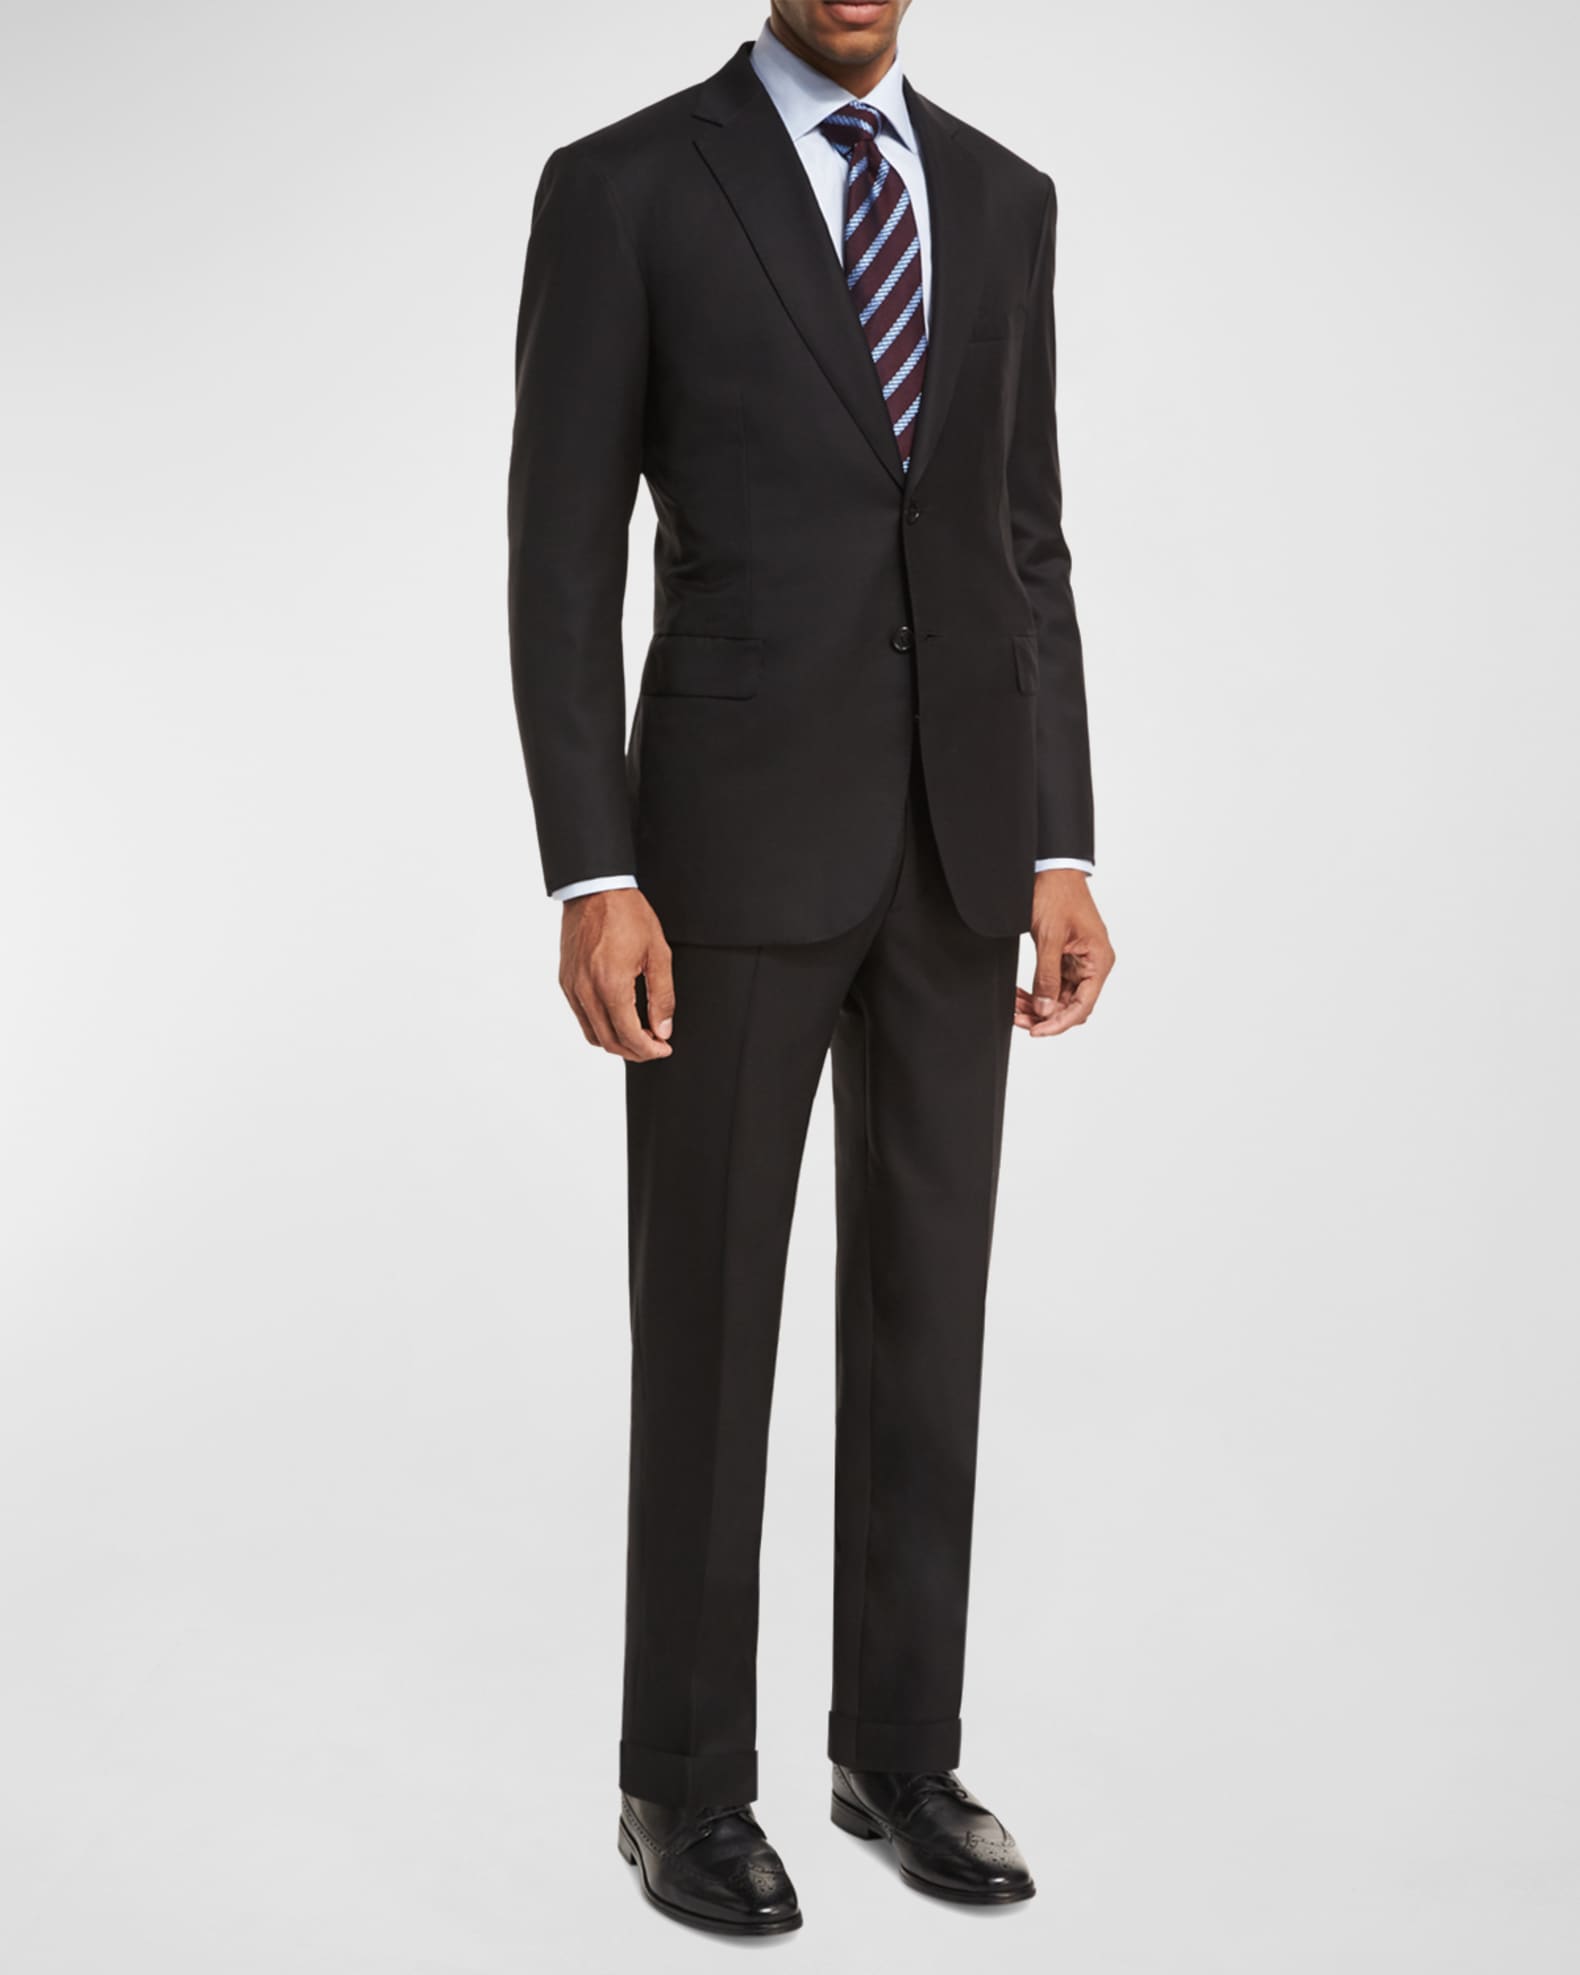 40 Awesome Brioni Suits - For The Perfect Formal and Official Look